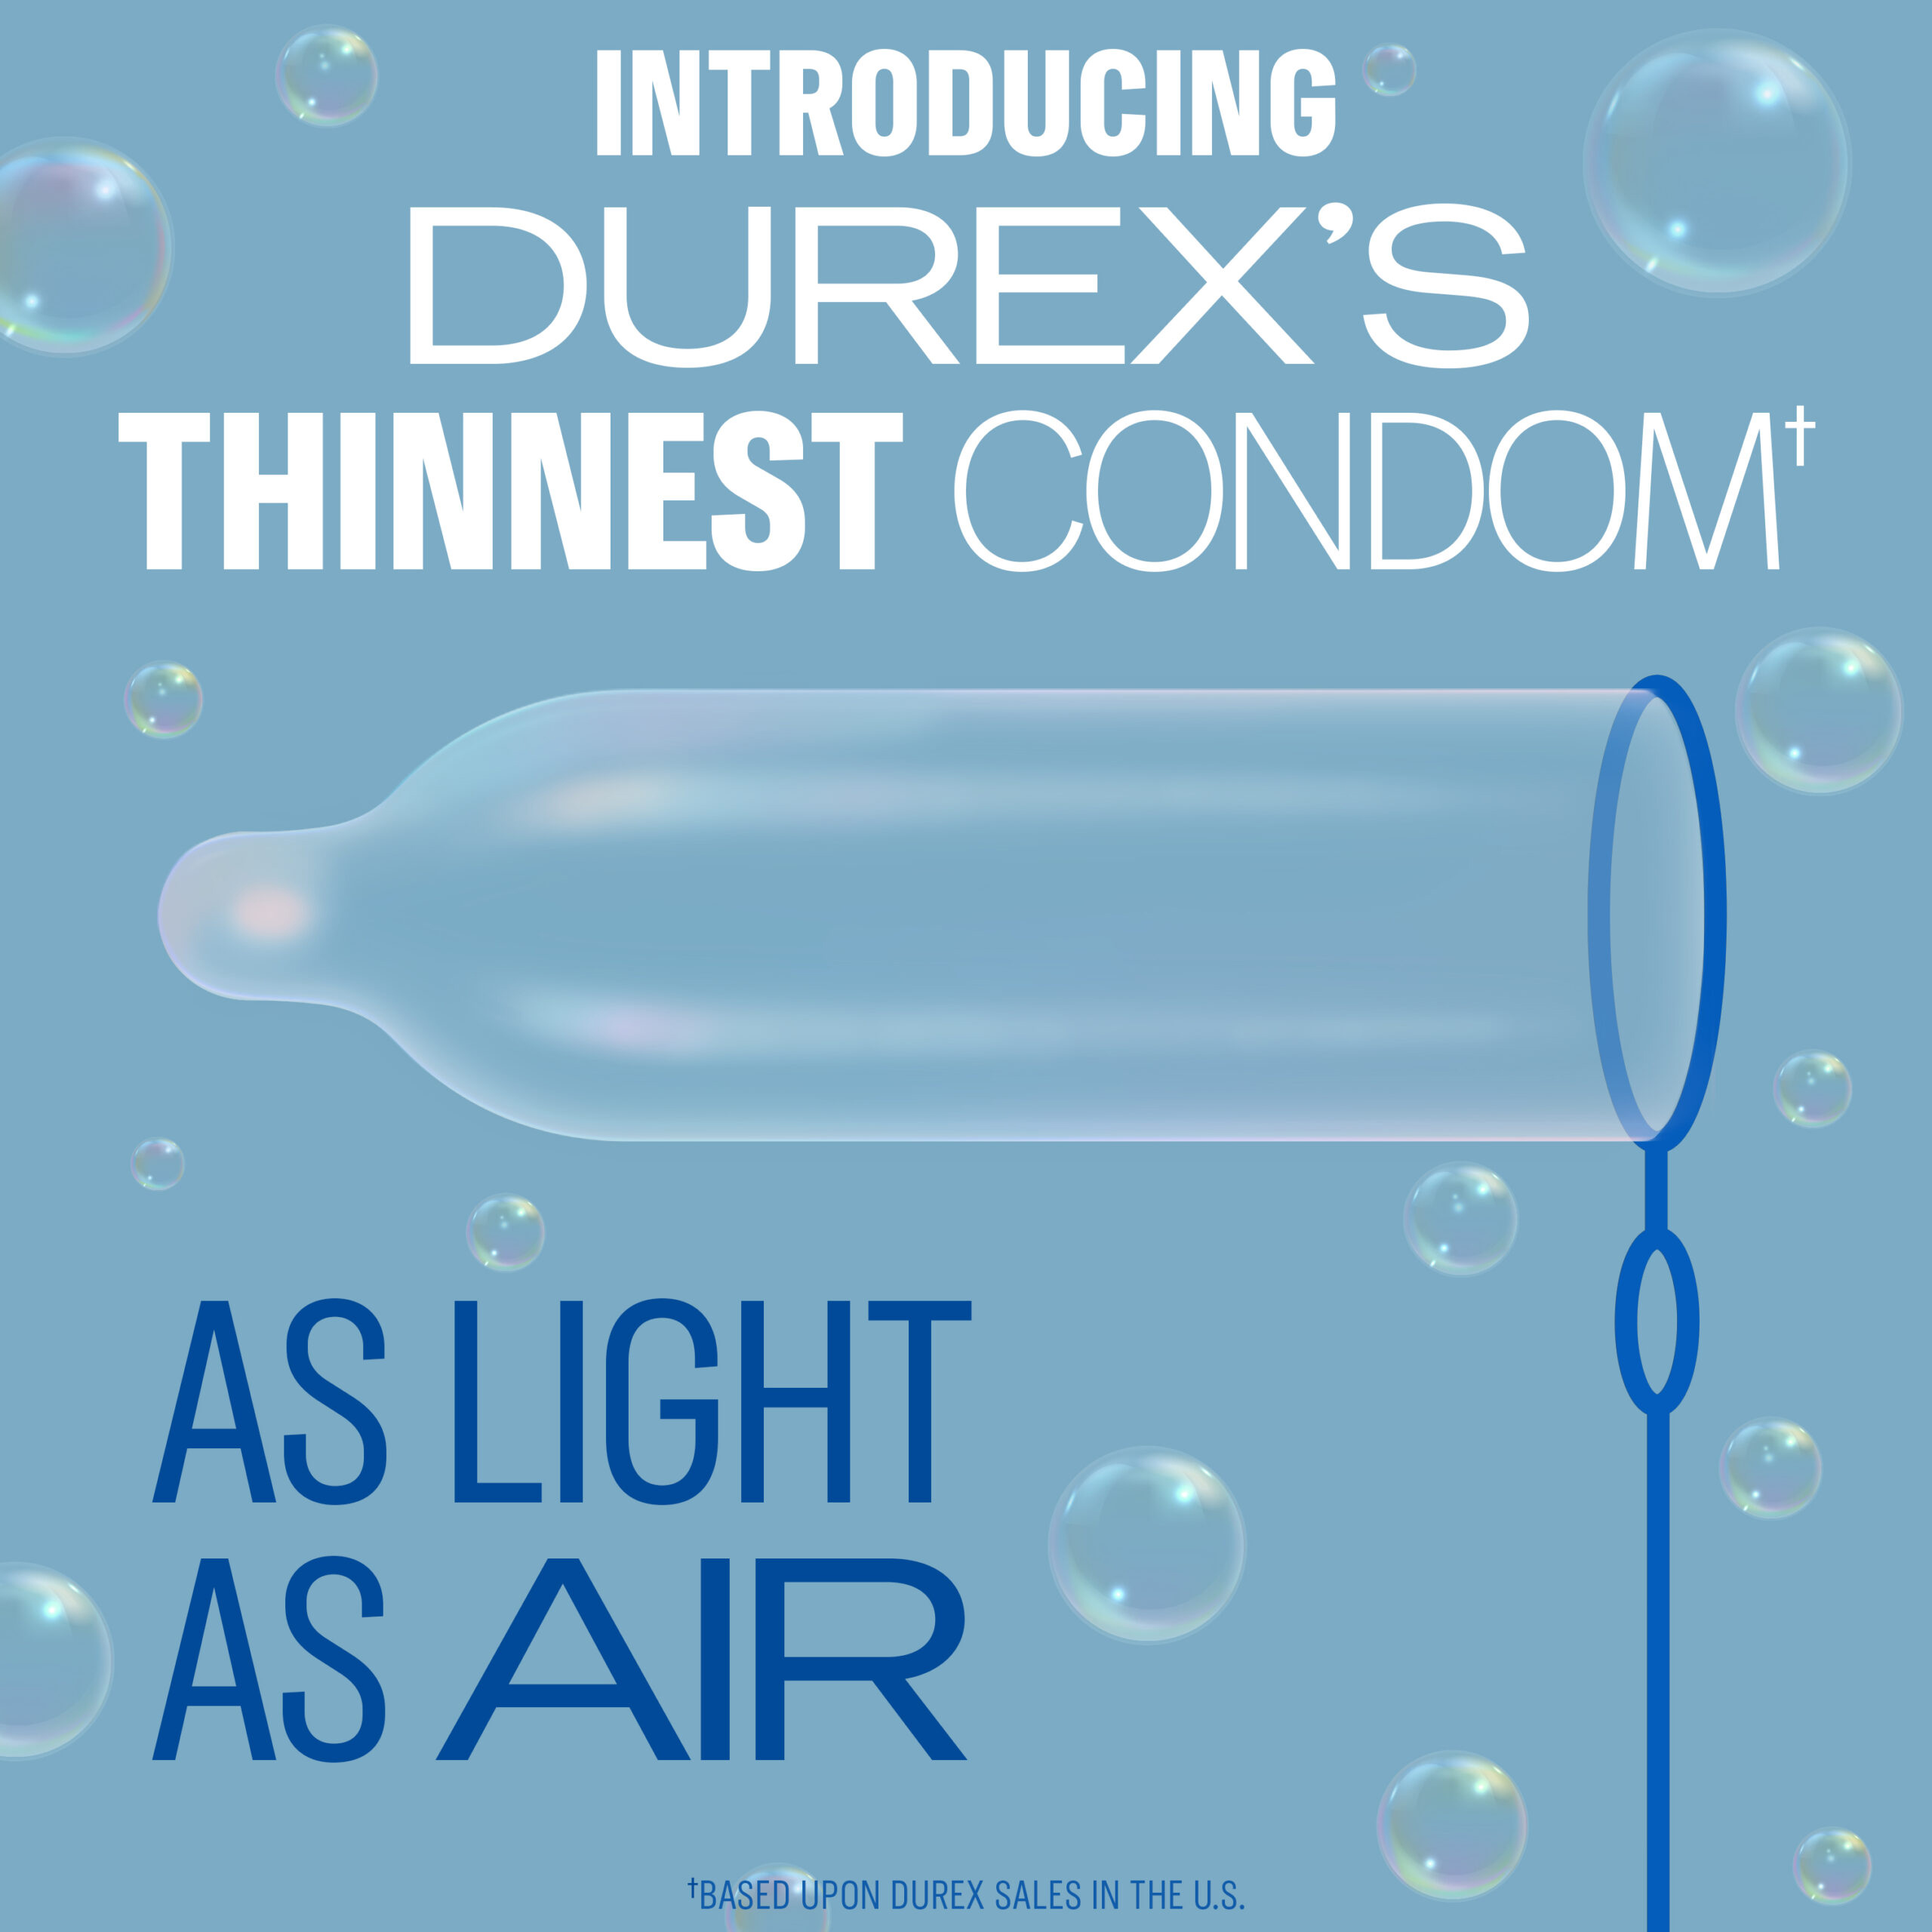 Buy Durex Extra Thin Packet Of 10 Condoms Online at Flat 